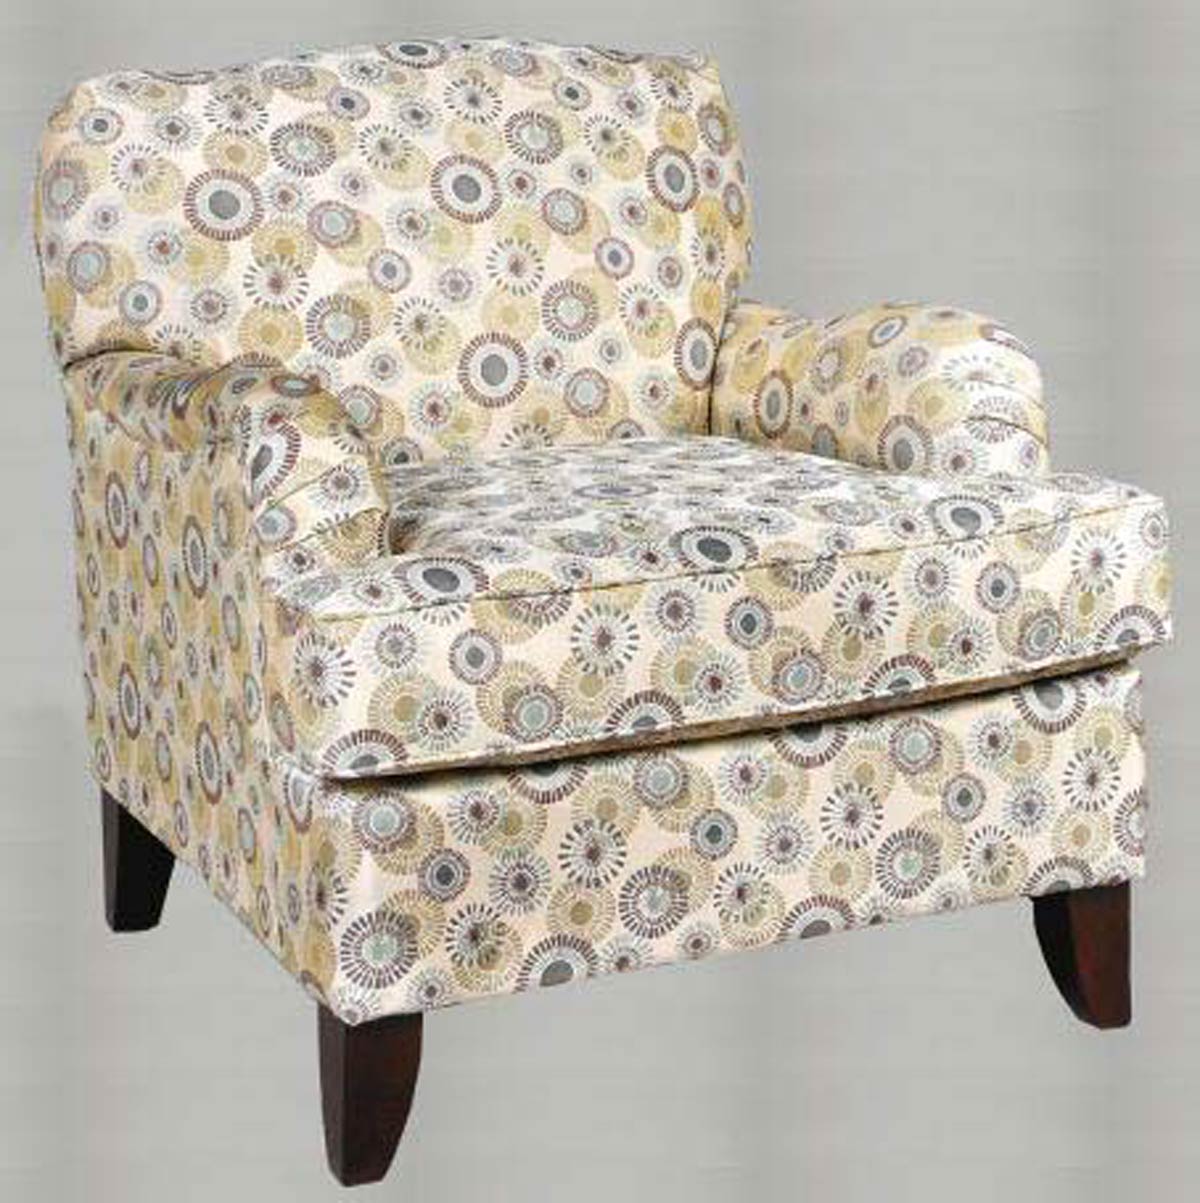 Chelsea Home Anita Accent Chair - Nightlife Spring